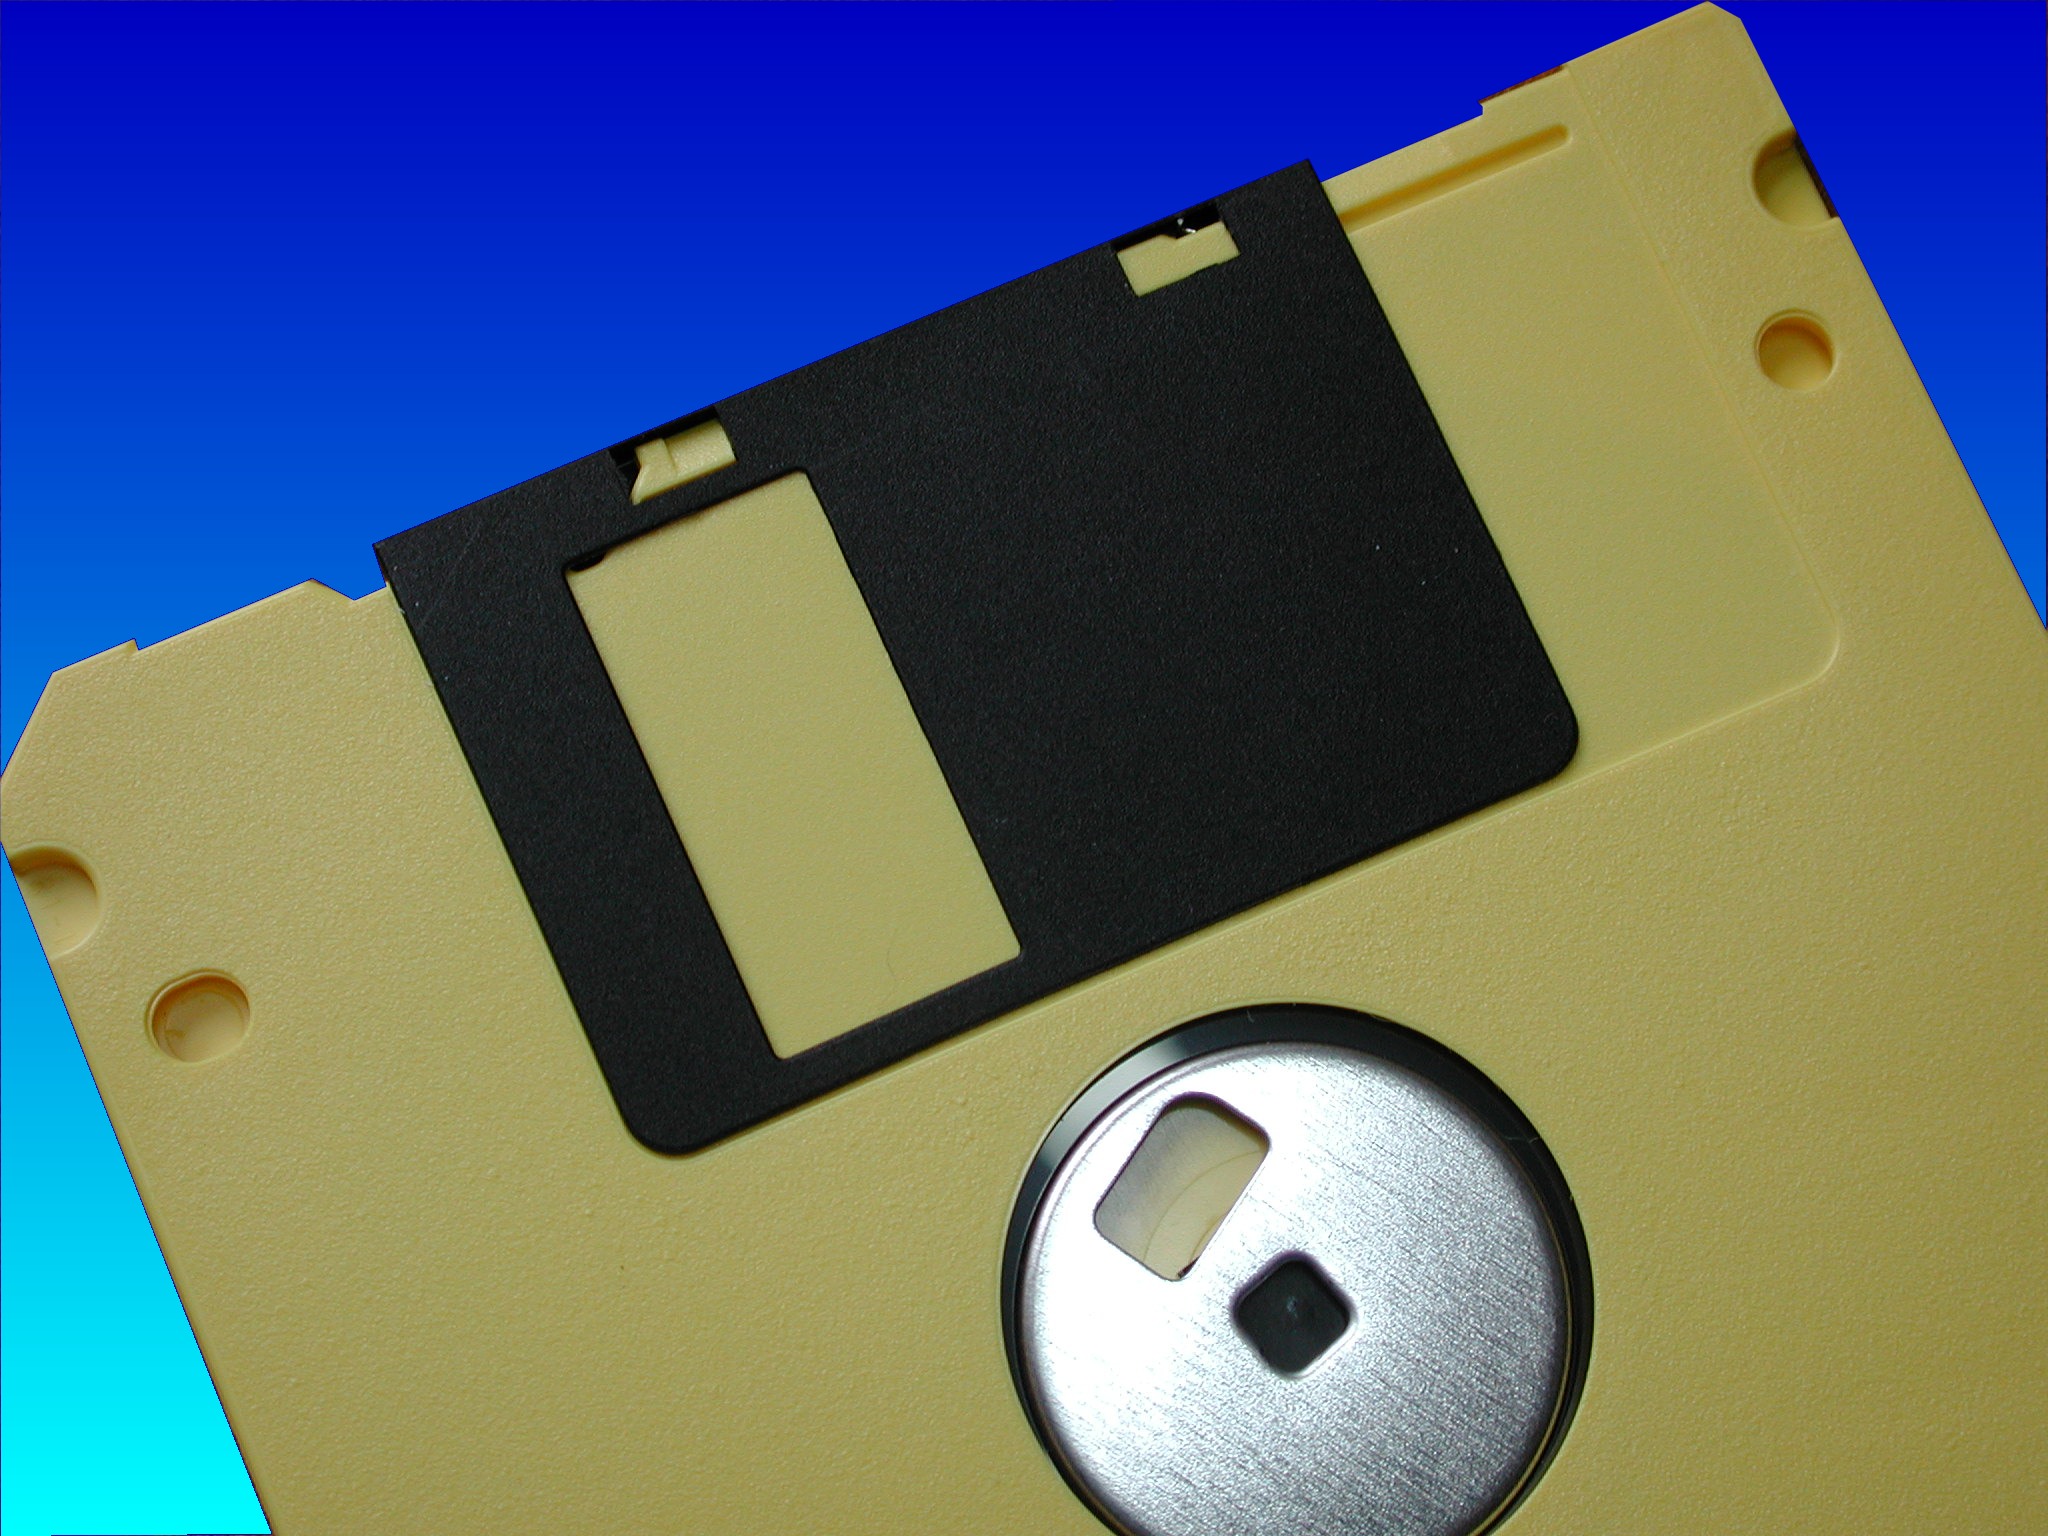 how to recover data from floppy disk that says it is not formatted